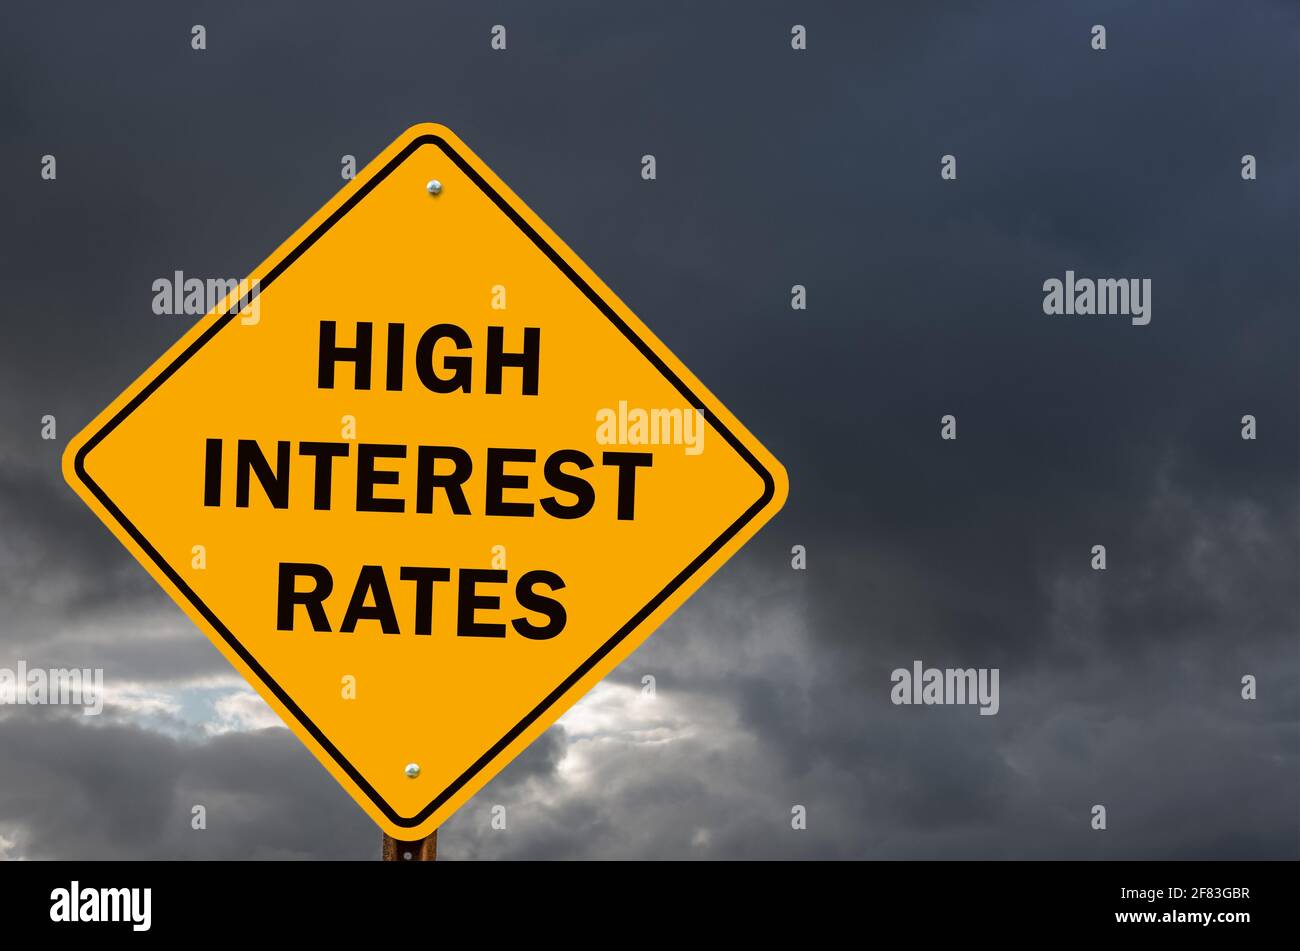 Conceptual warning road sign about high interest rates with storm clouds in background Stock Photo